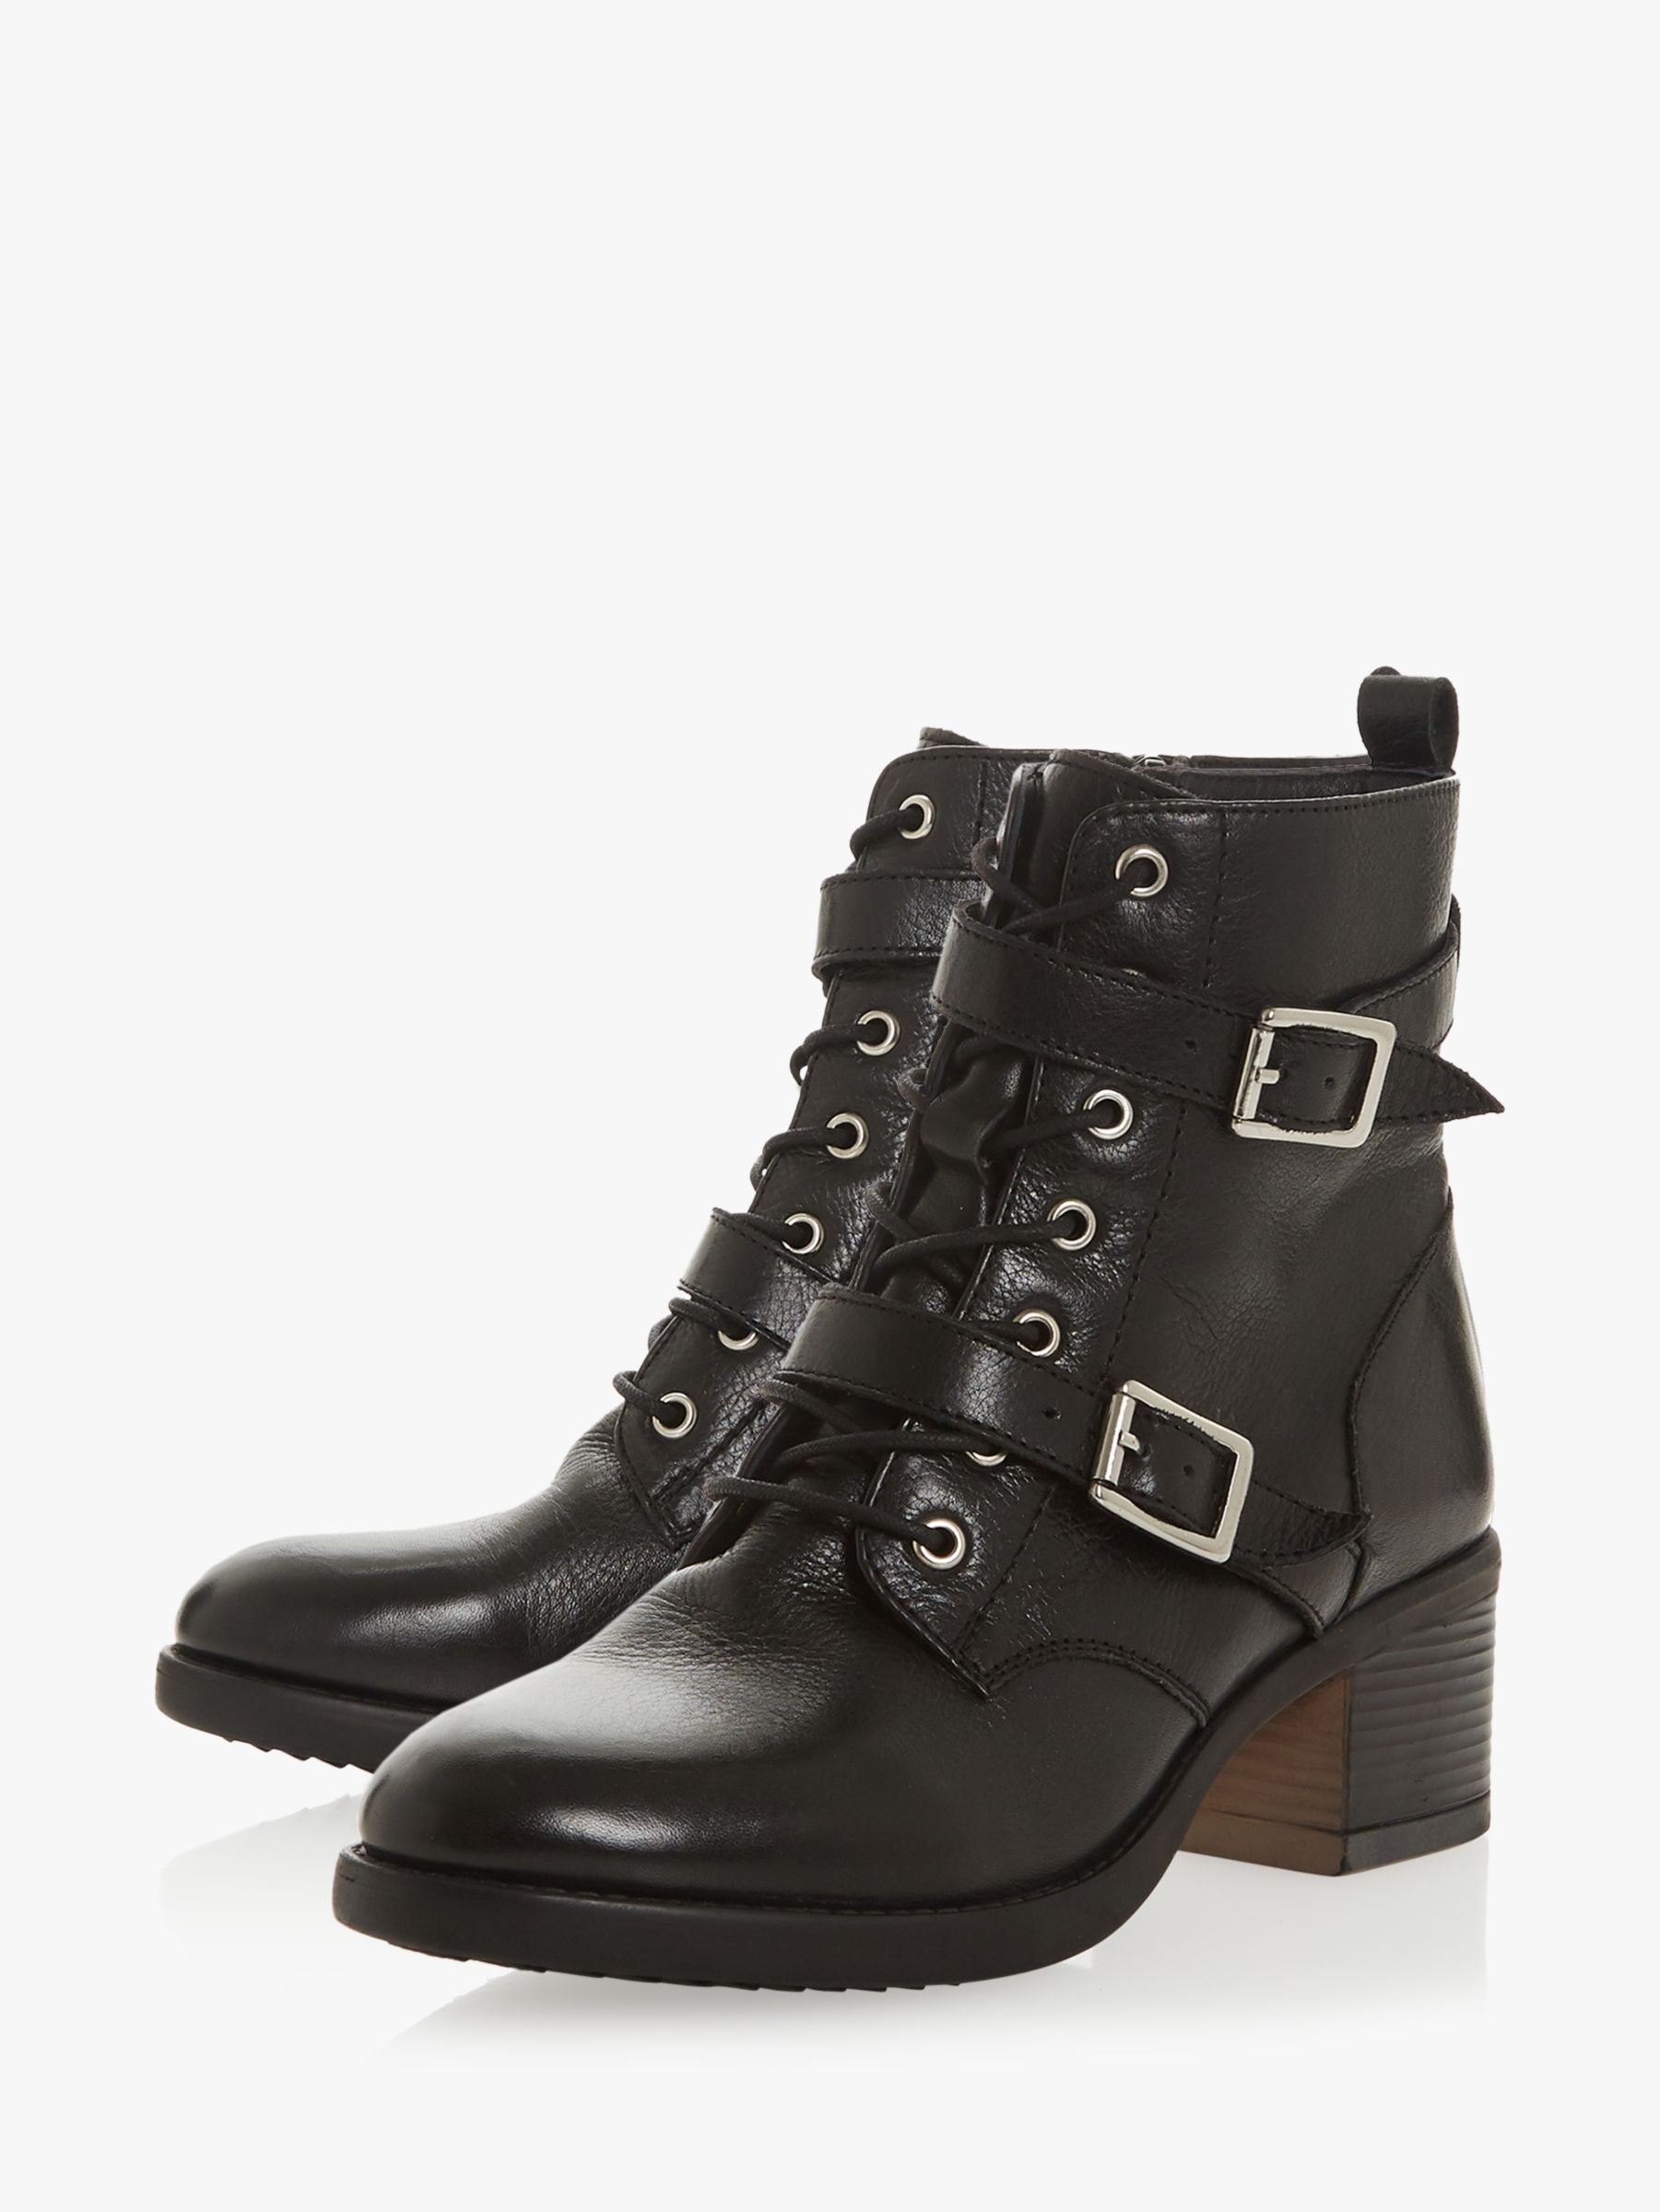 Dune Paxtone Buckle Lace Ankle Boots, Black Leather